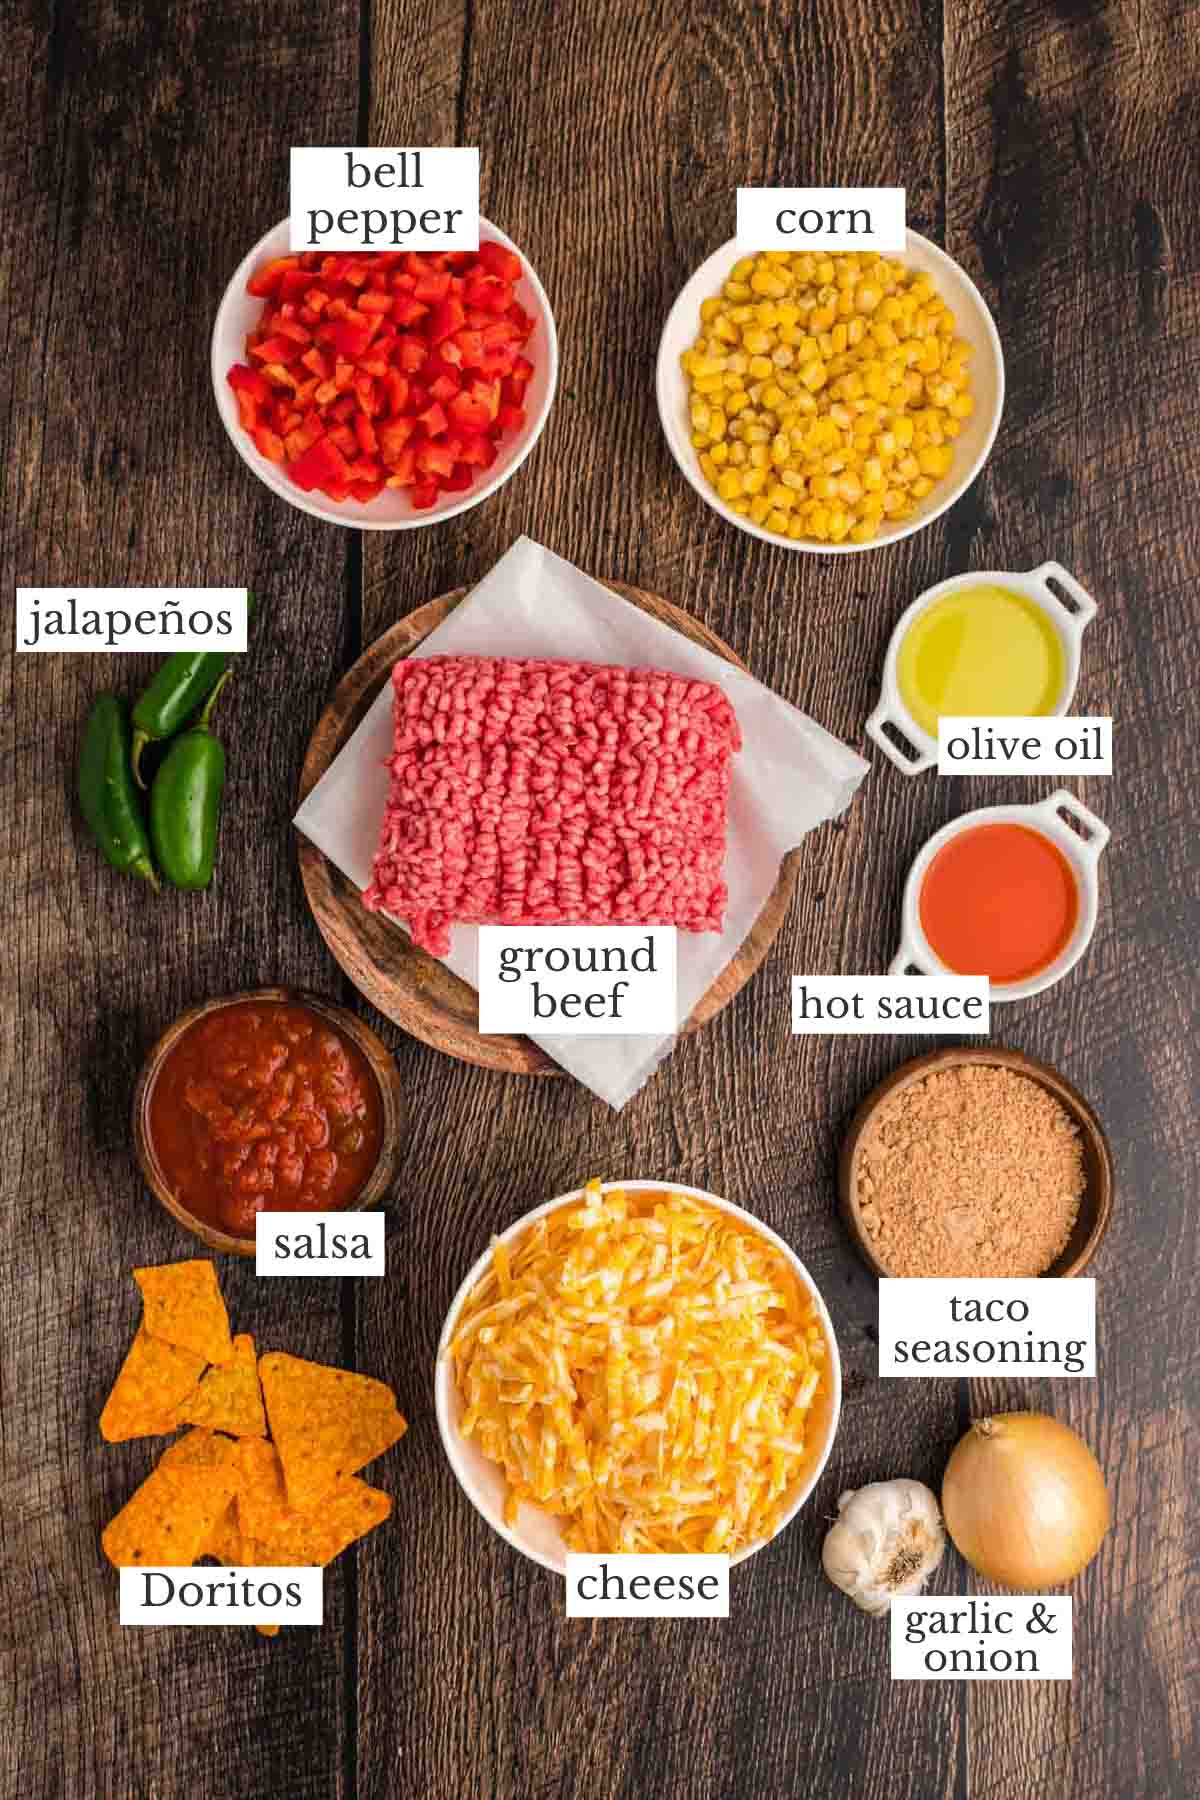 ingredients for taco casserole with doritos.